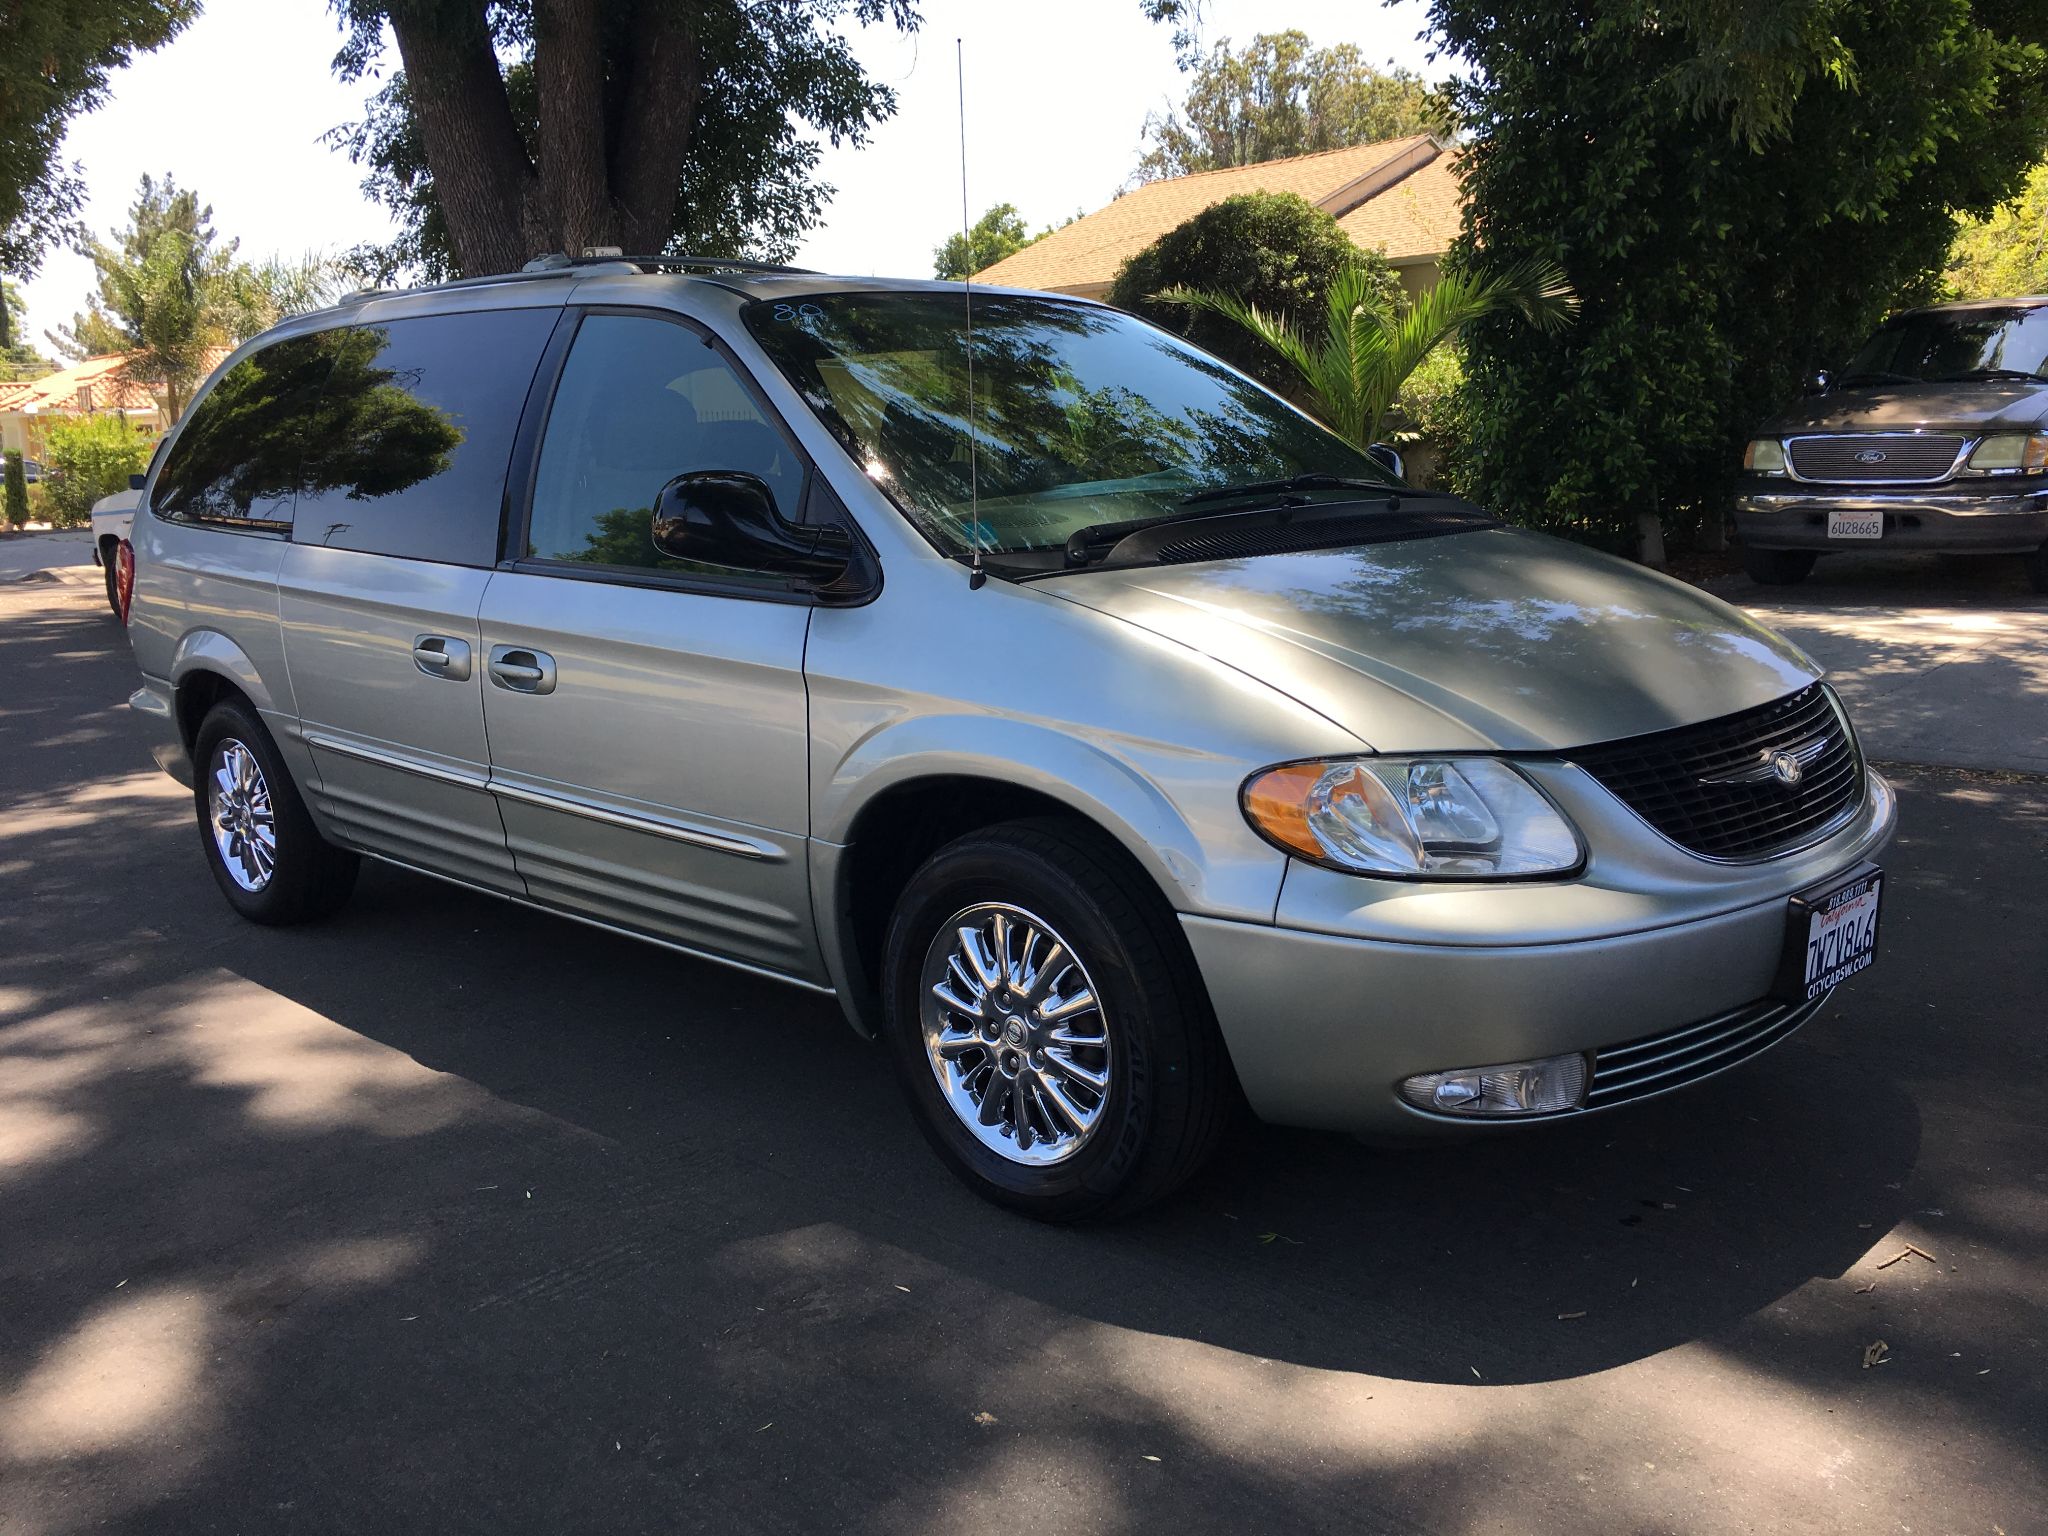 Used 2003 Chrysler Town & Country Limited at City Cars